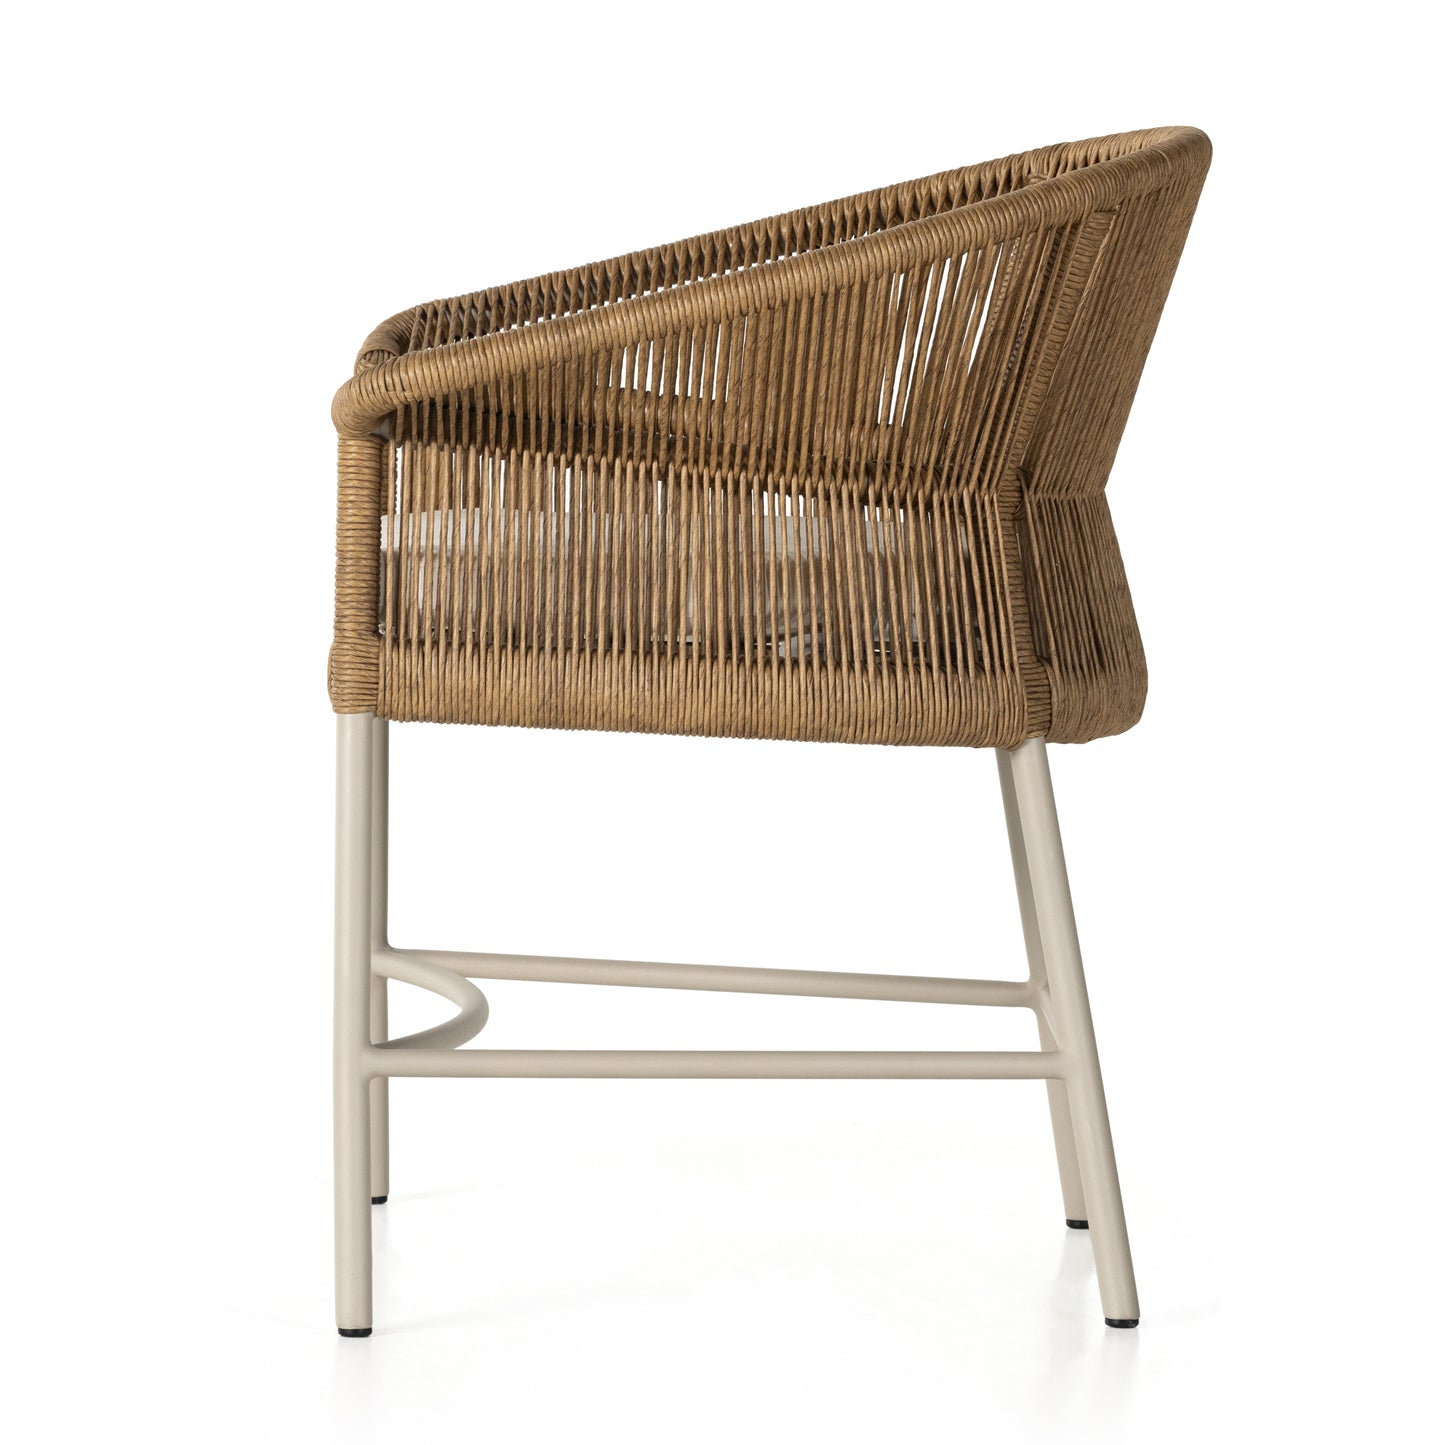 Load image into Gallery viewer, Irving Outdoor Dining Armchair-Sand Outdoor Chairs Four Hands     Four Hands, Mid Century Modern Furniture, Old Bones Furniture Company, Old Bones Co, Modern Mid Century, Designer Furniture, https://www.oldbonesco.com/
